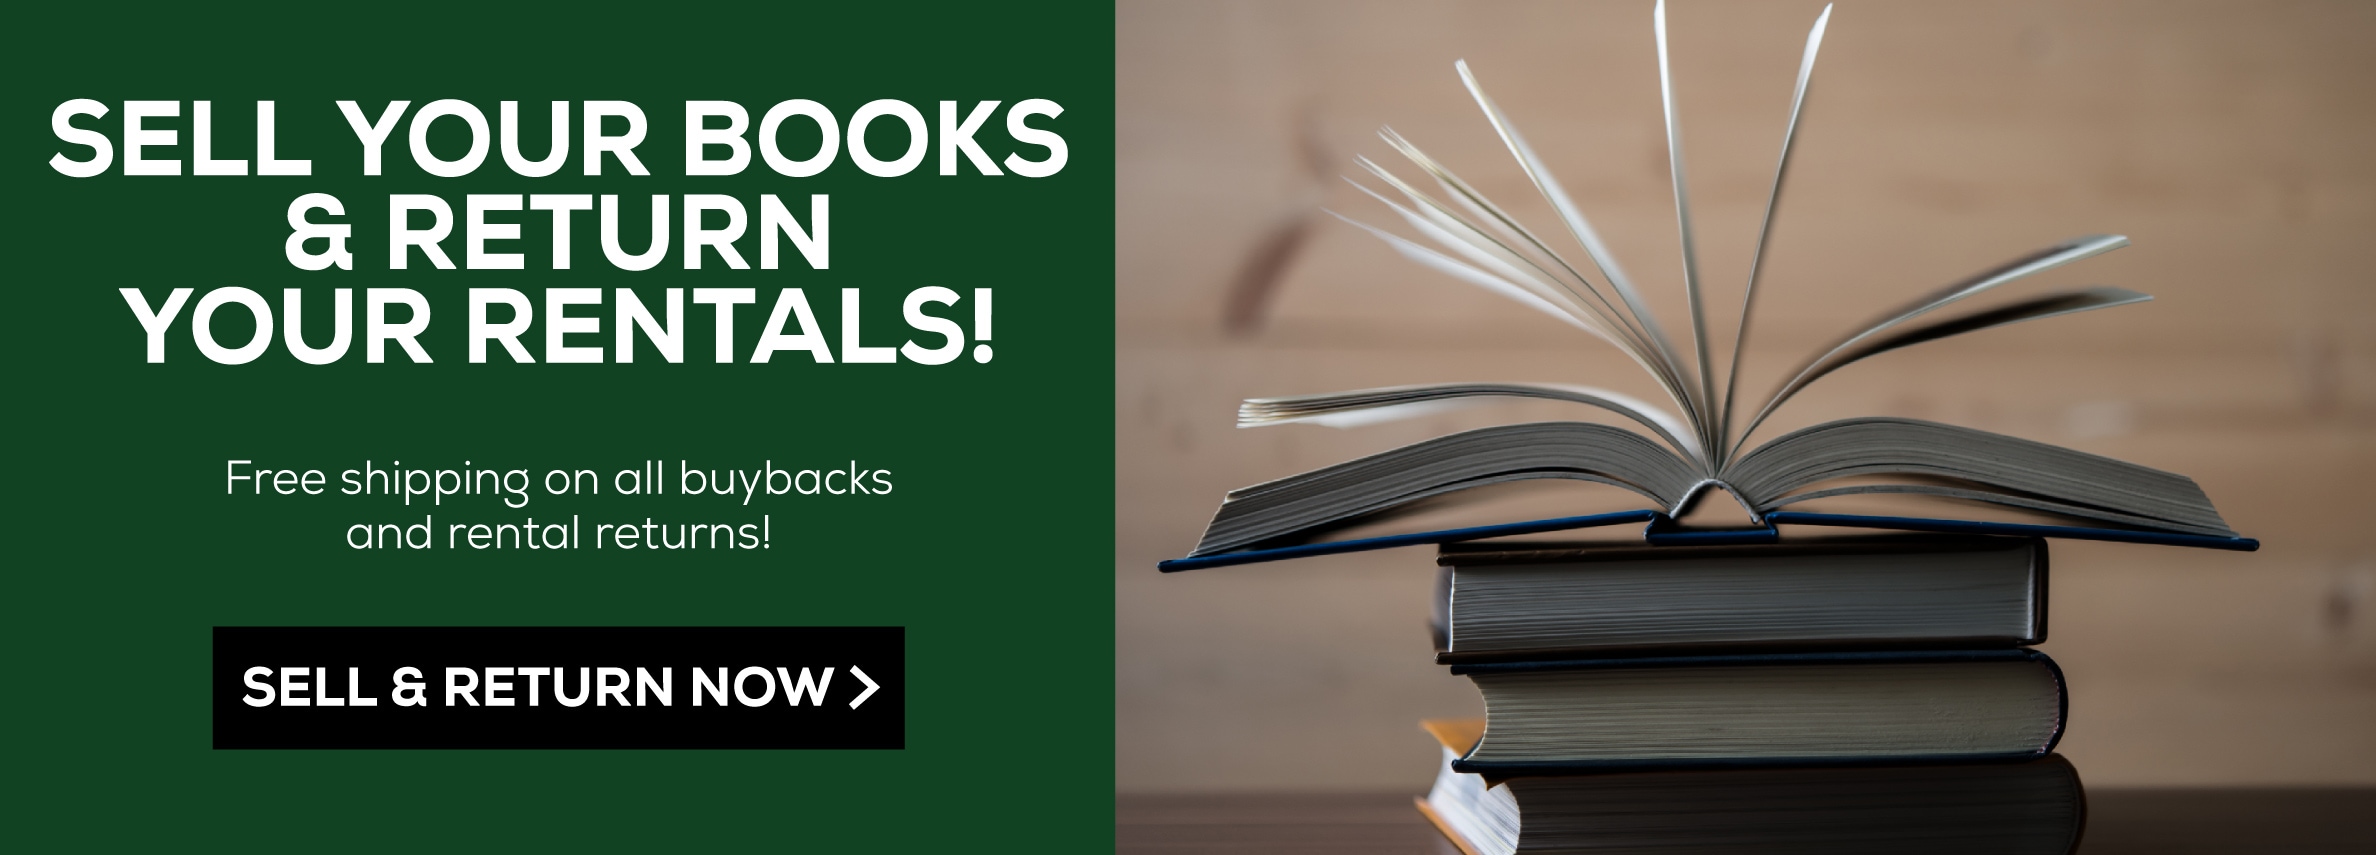 Sell Your Books & Return Your Rentals - Free Shipping on all buybacks and rental returns! Sell and Return Now